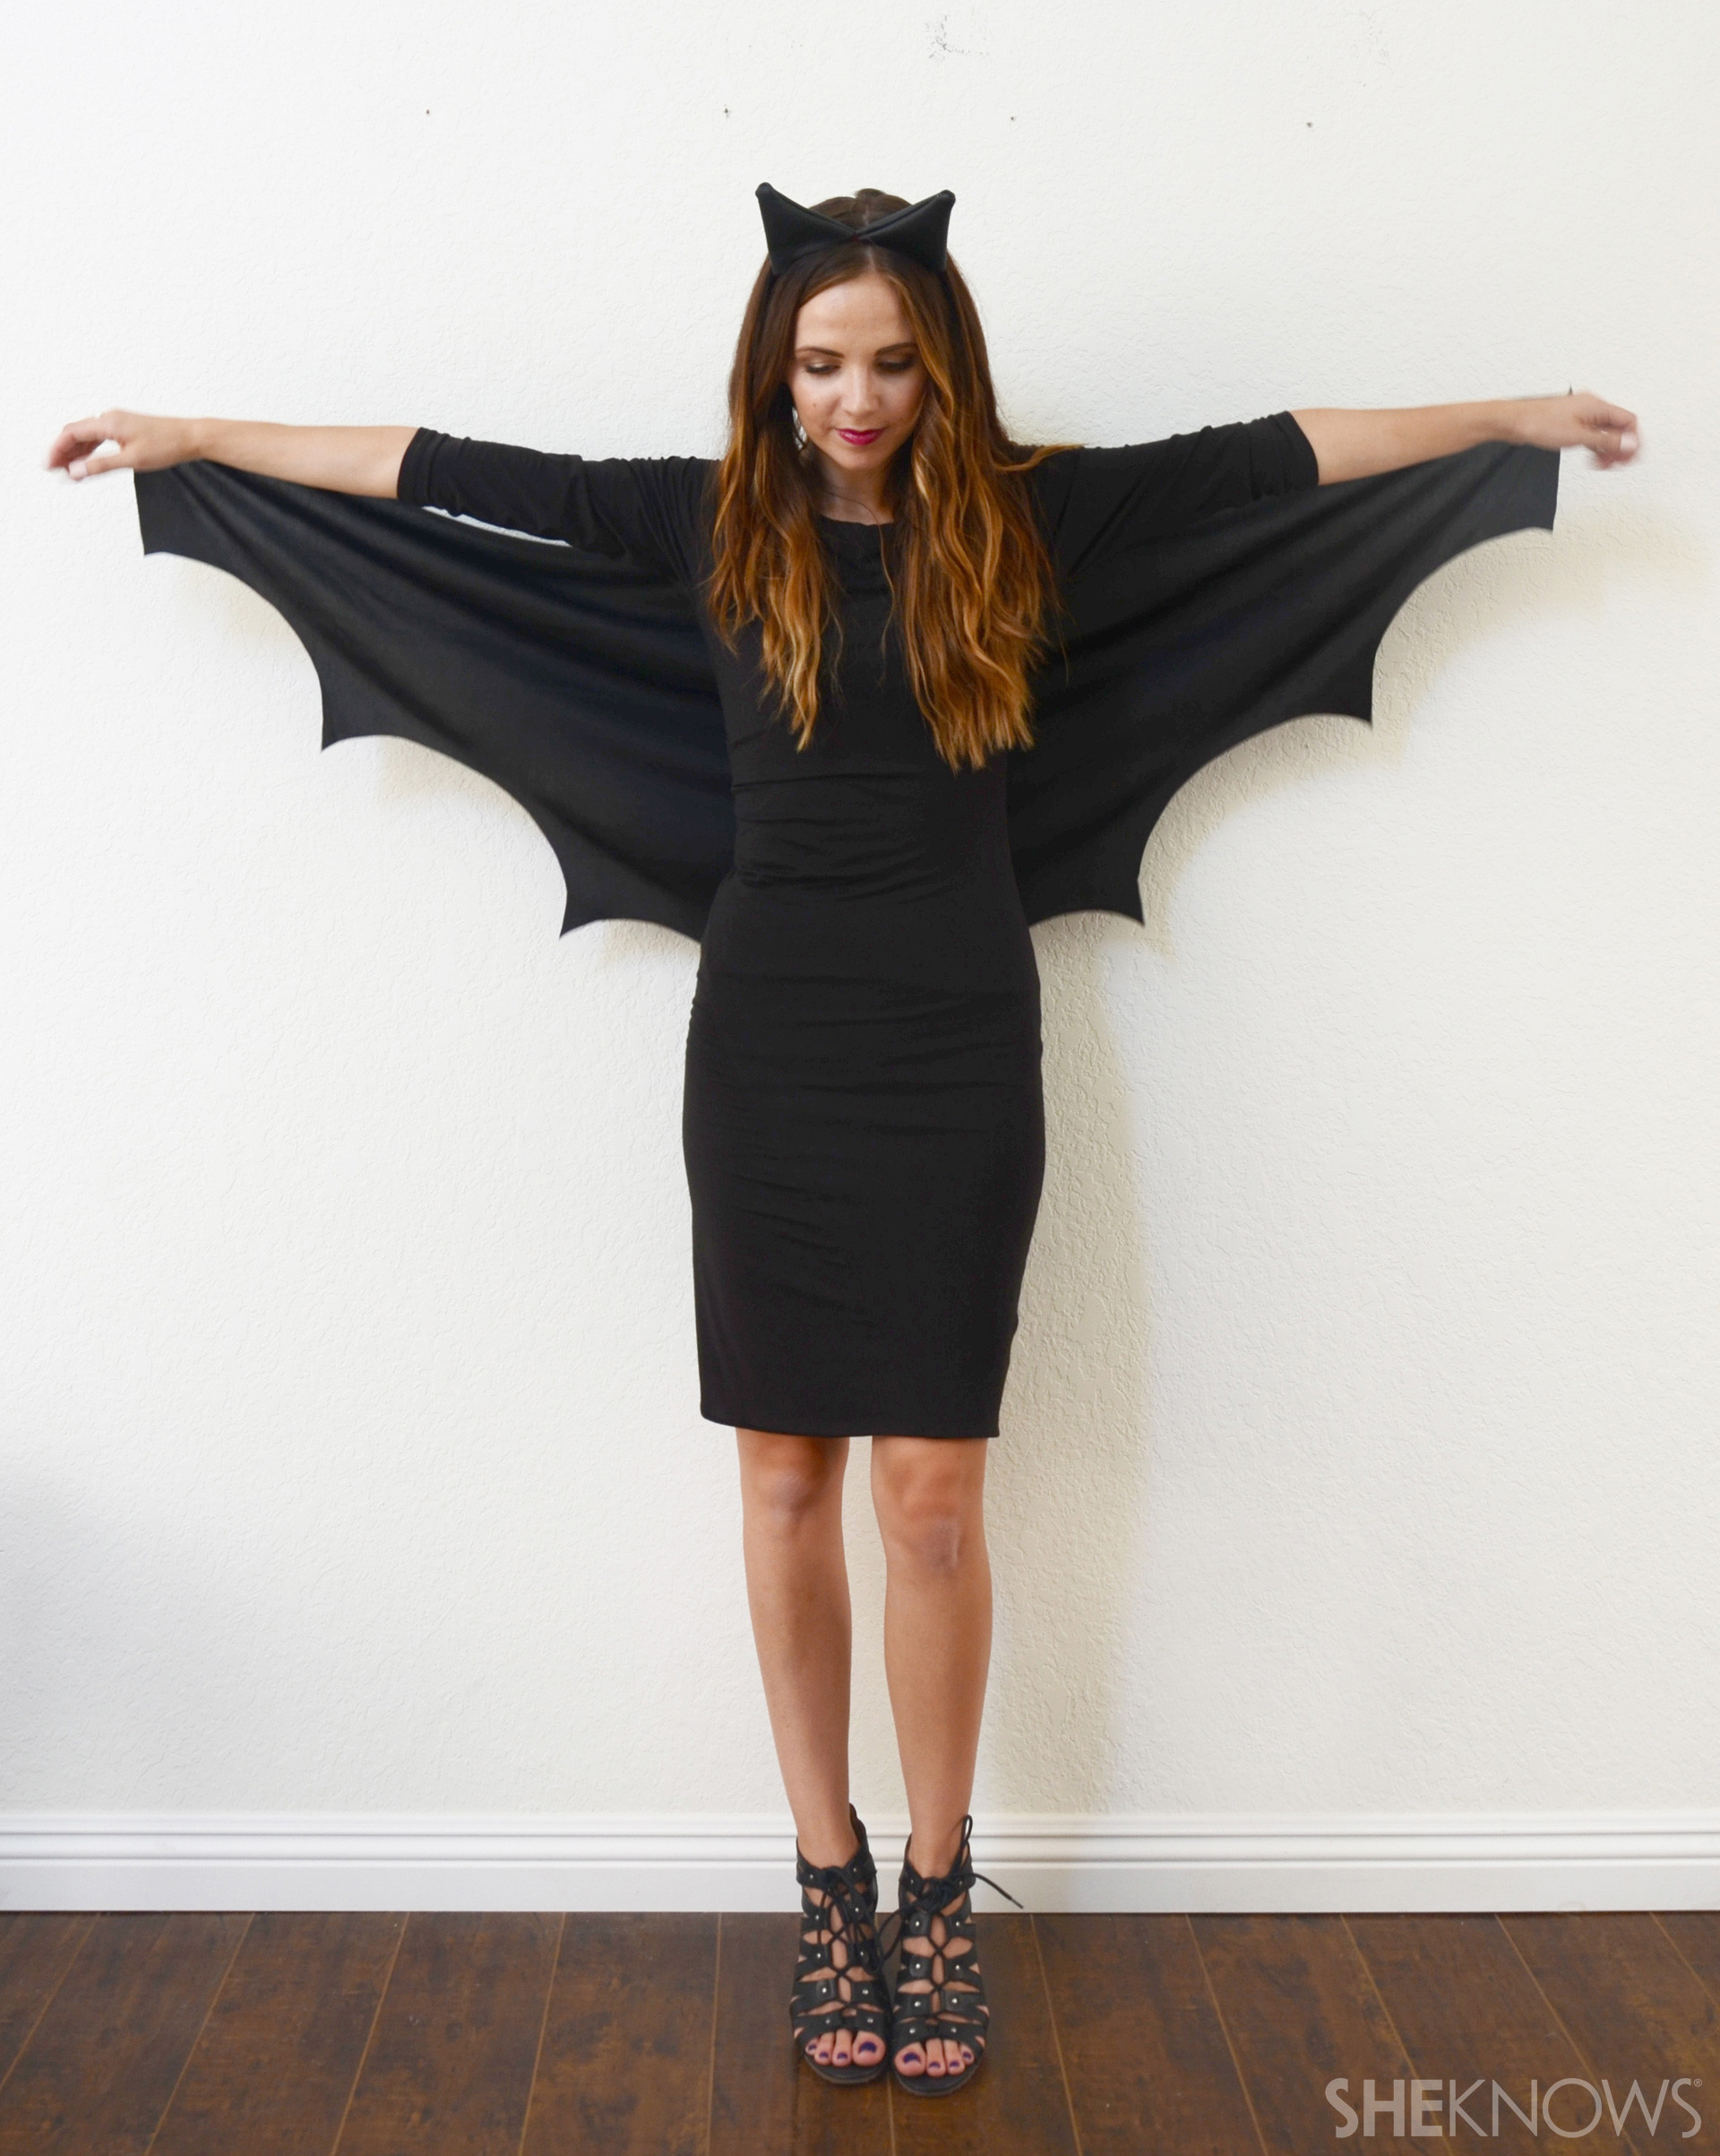 Diy Halloween Costumes
 15 Last Minute DIY Halloween Costumes To Whip Up